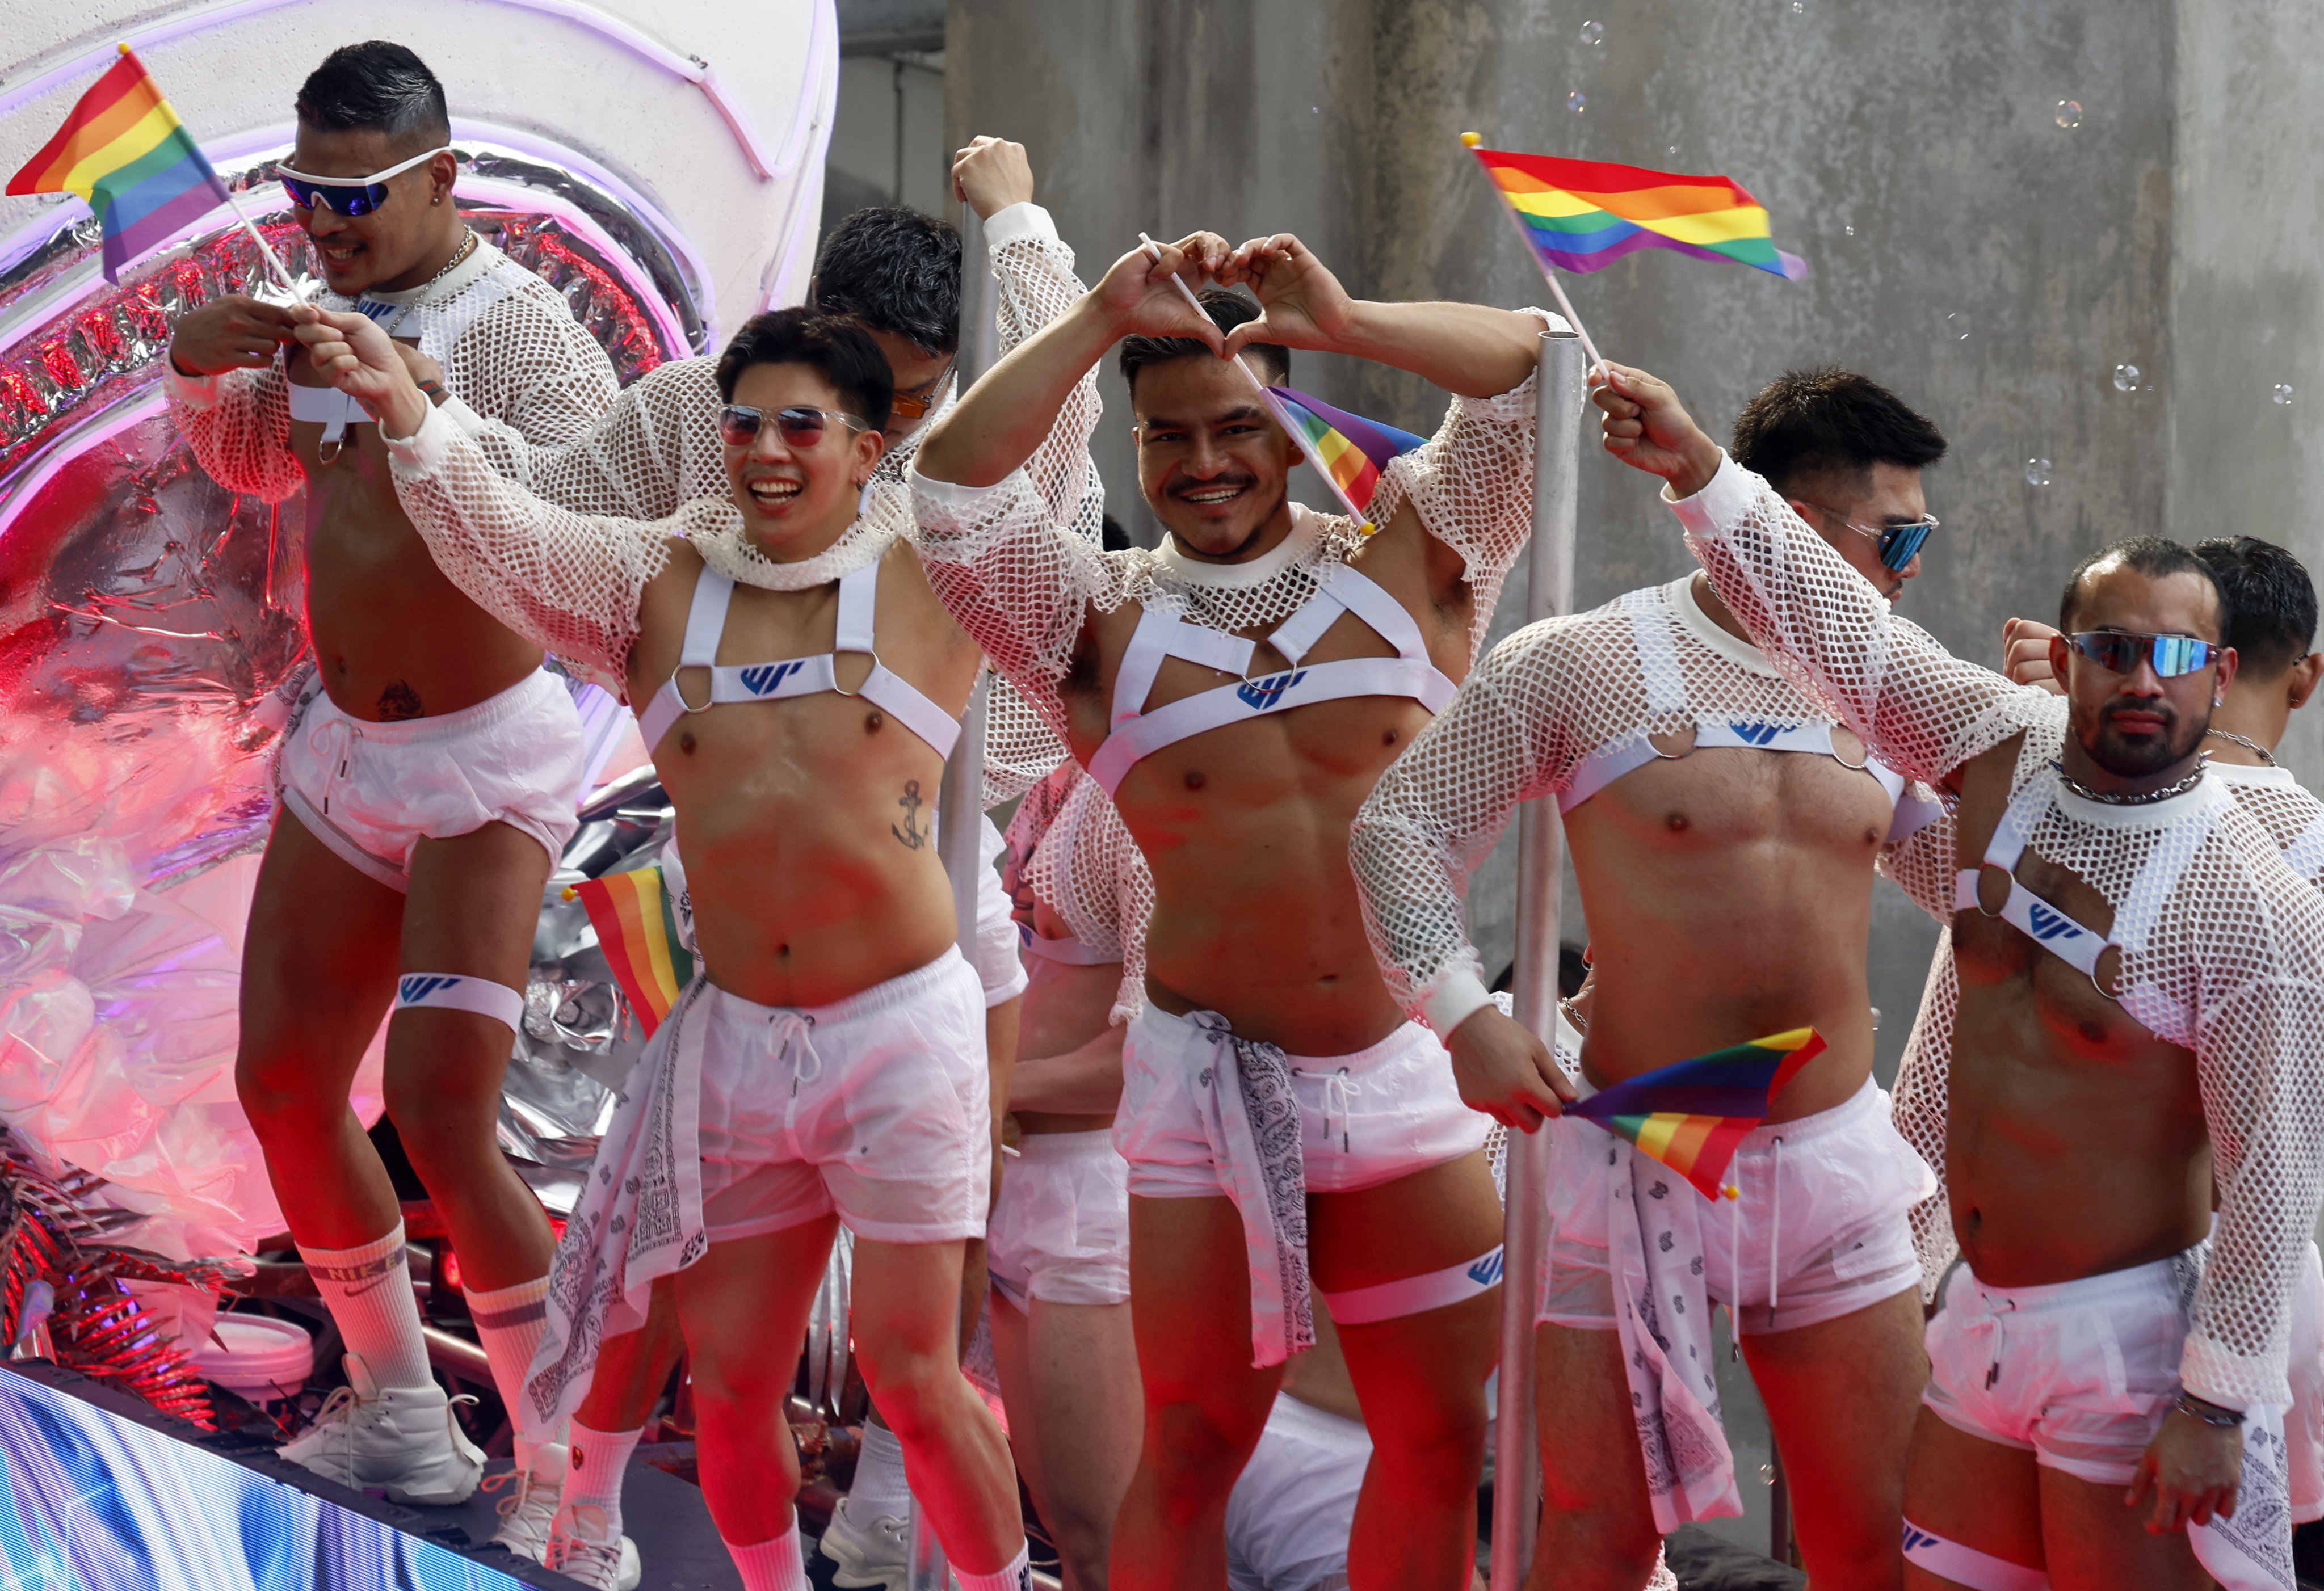 People take part in an LGBTQ parade to mark the end of Pride Month celebrations in Bangkok, Thailand on June 30. Photo: EPA-EFE